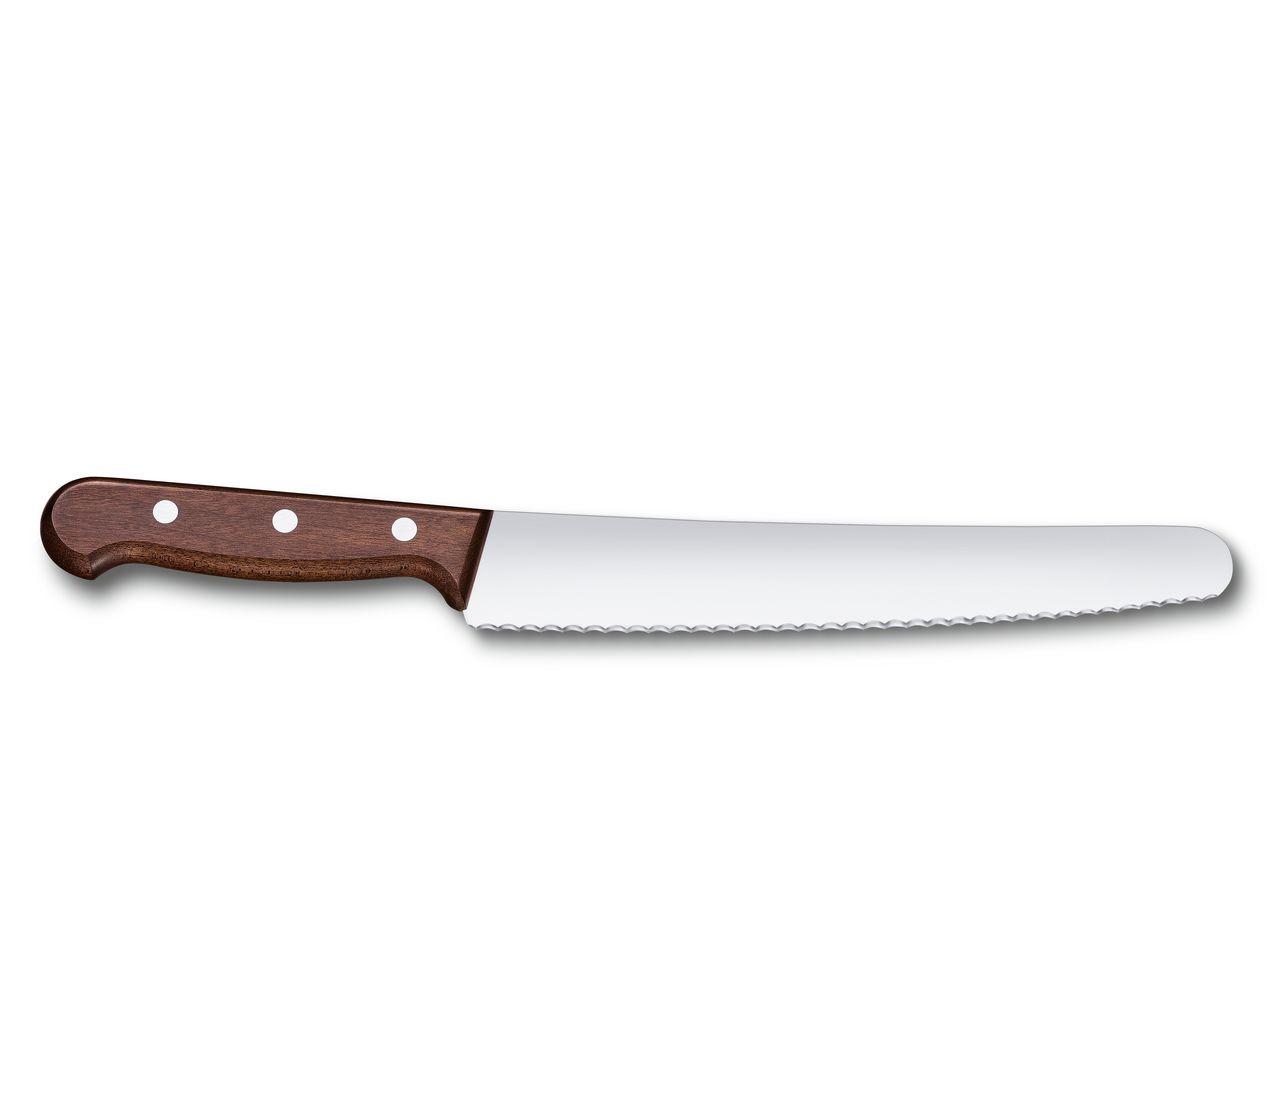  Victorinox Wood Bread and Pastry 8.5-Inch Knife: Home